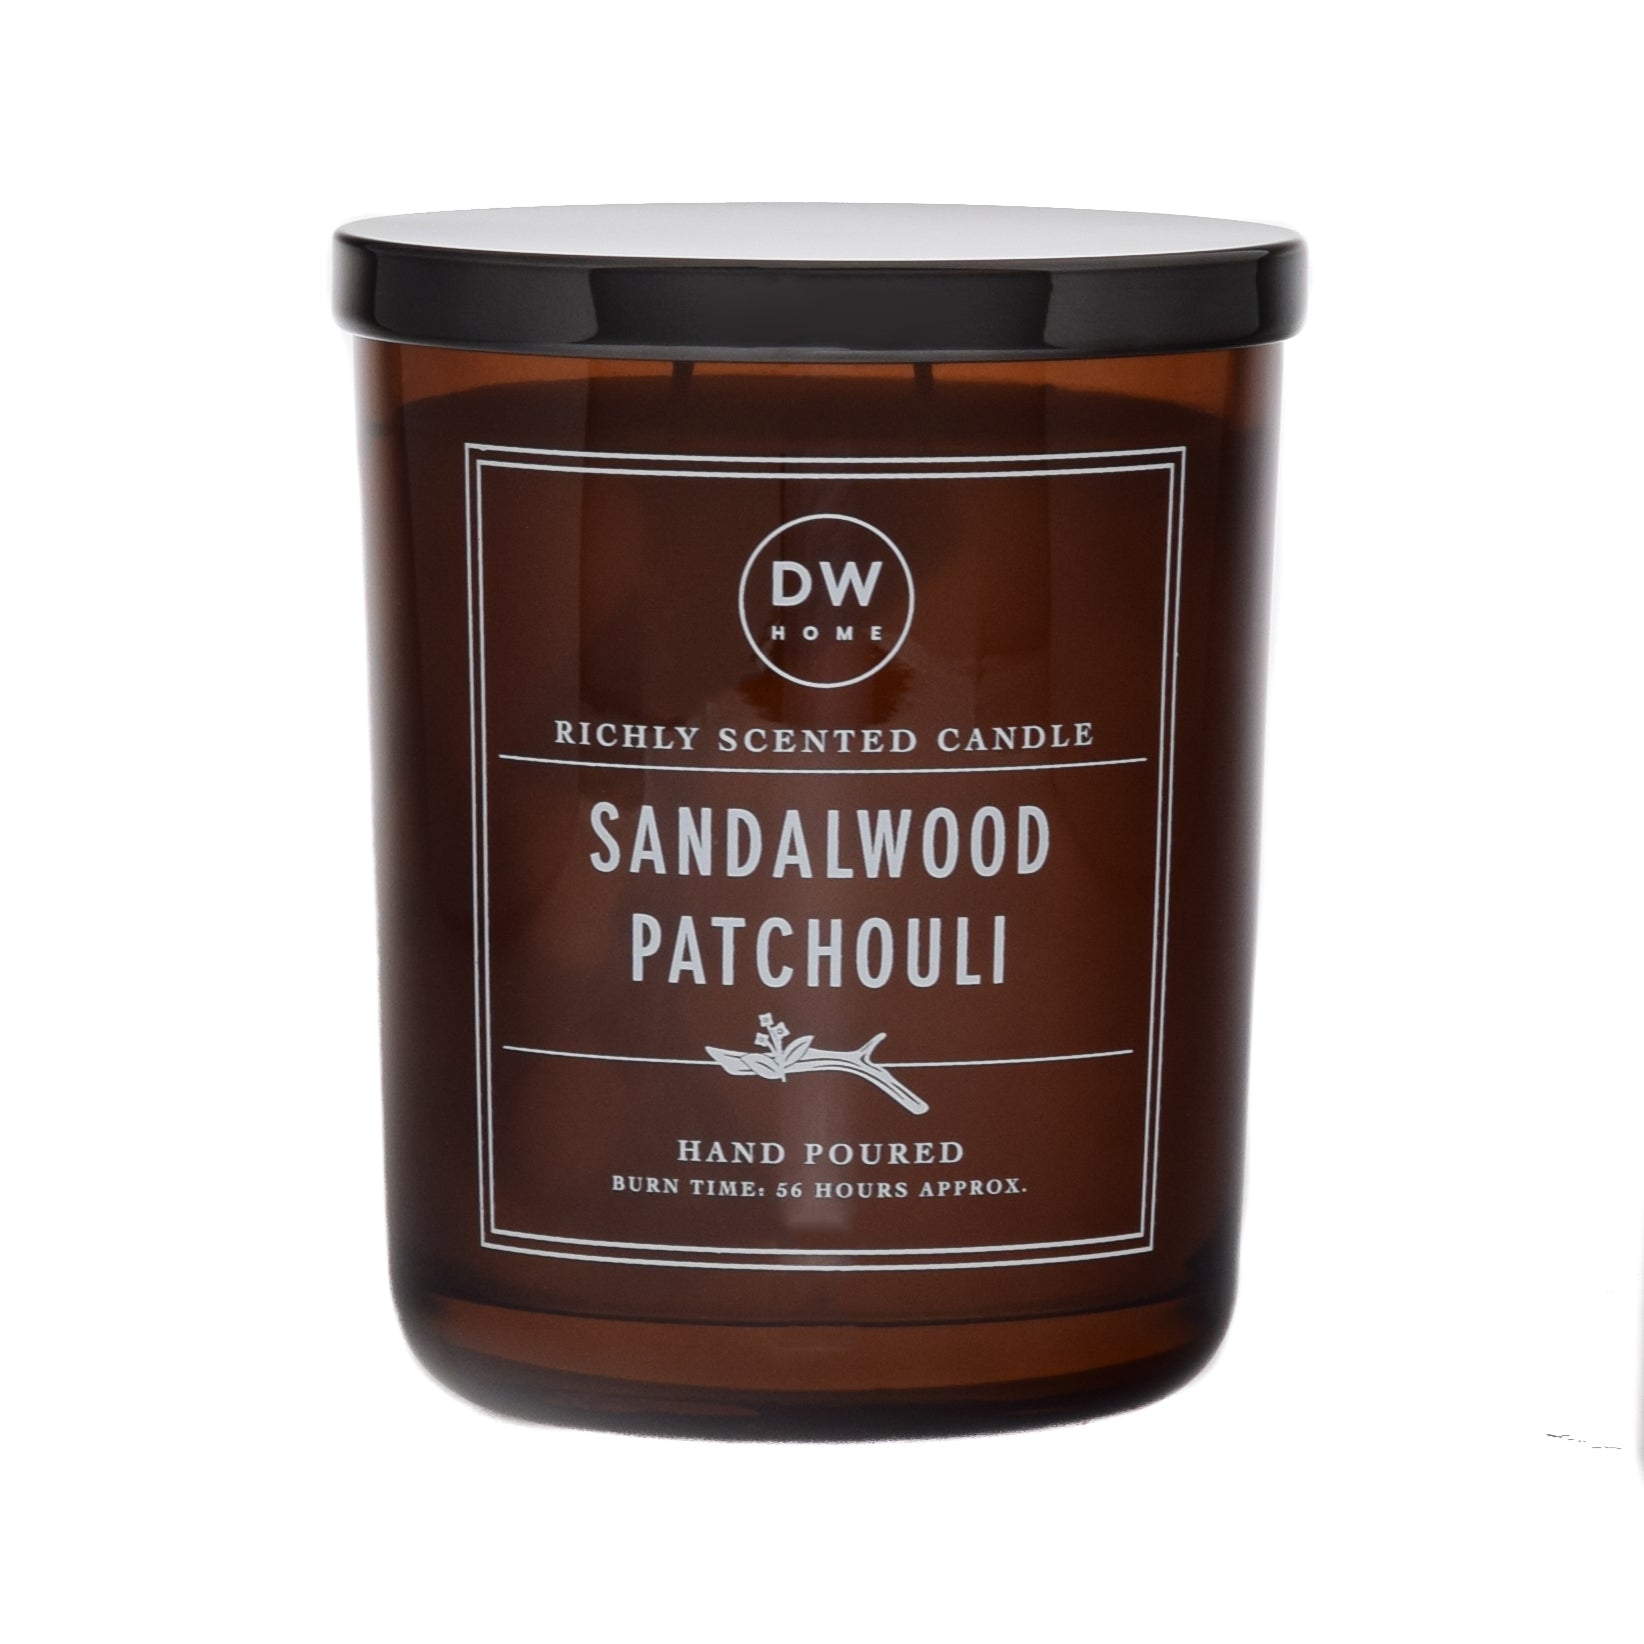 Patchouli Sandalwood Wax Melts by Candlecopia®, 2 Pack